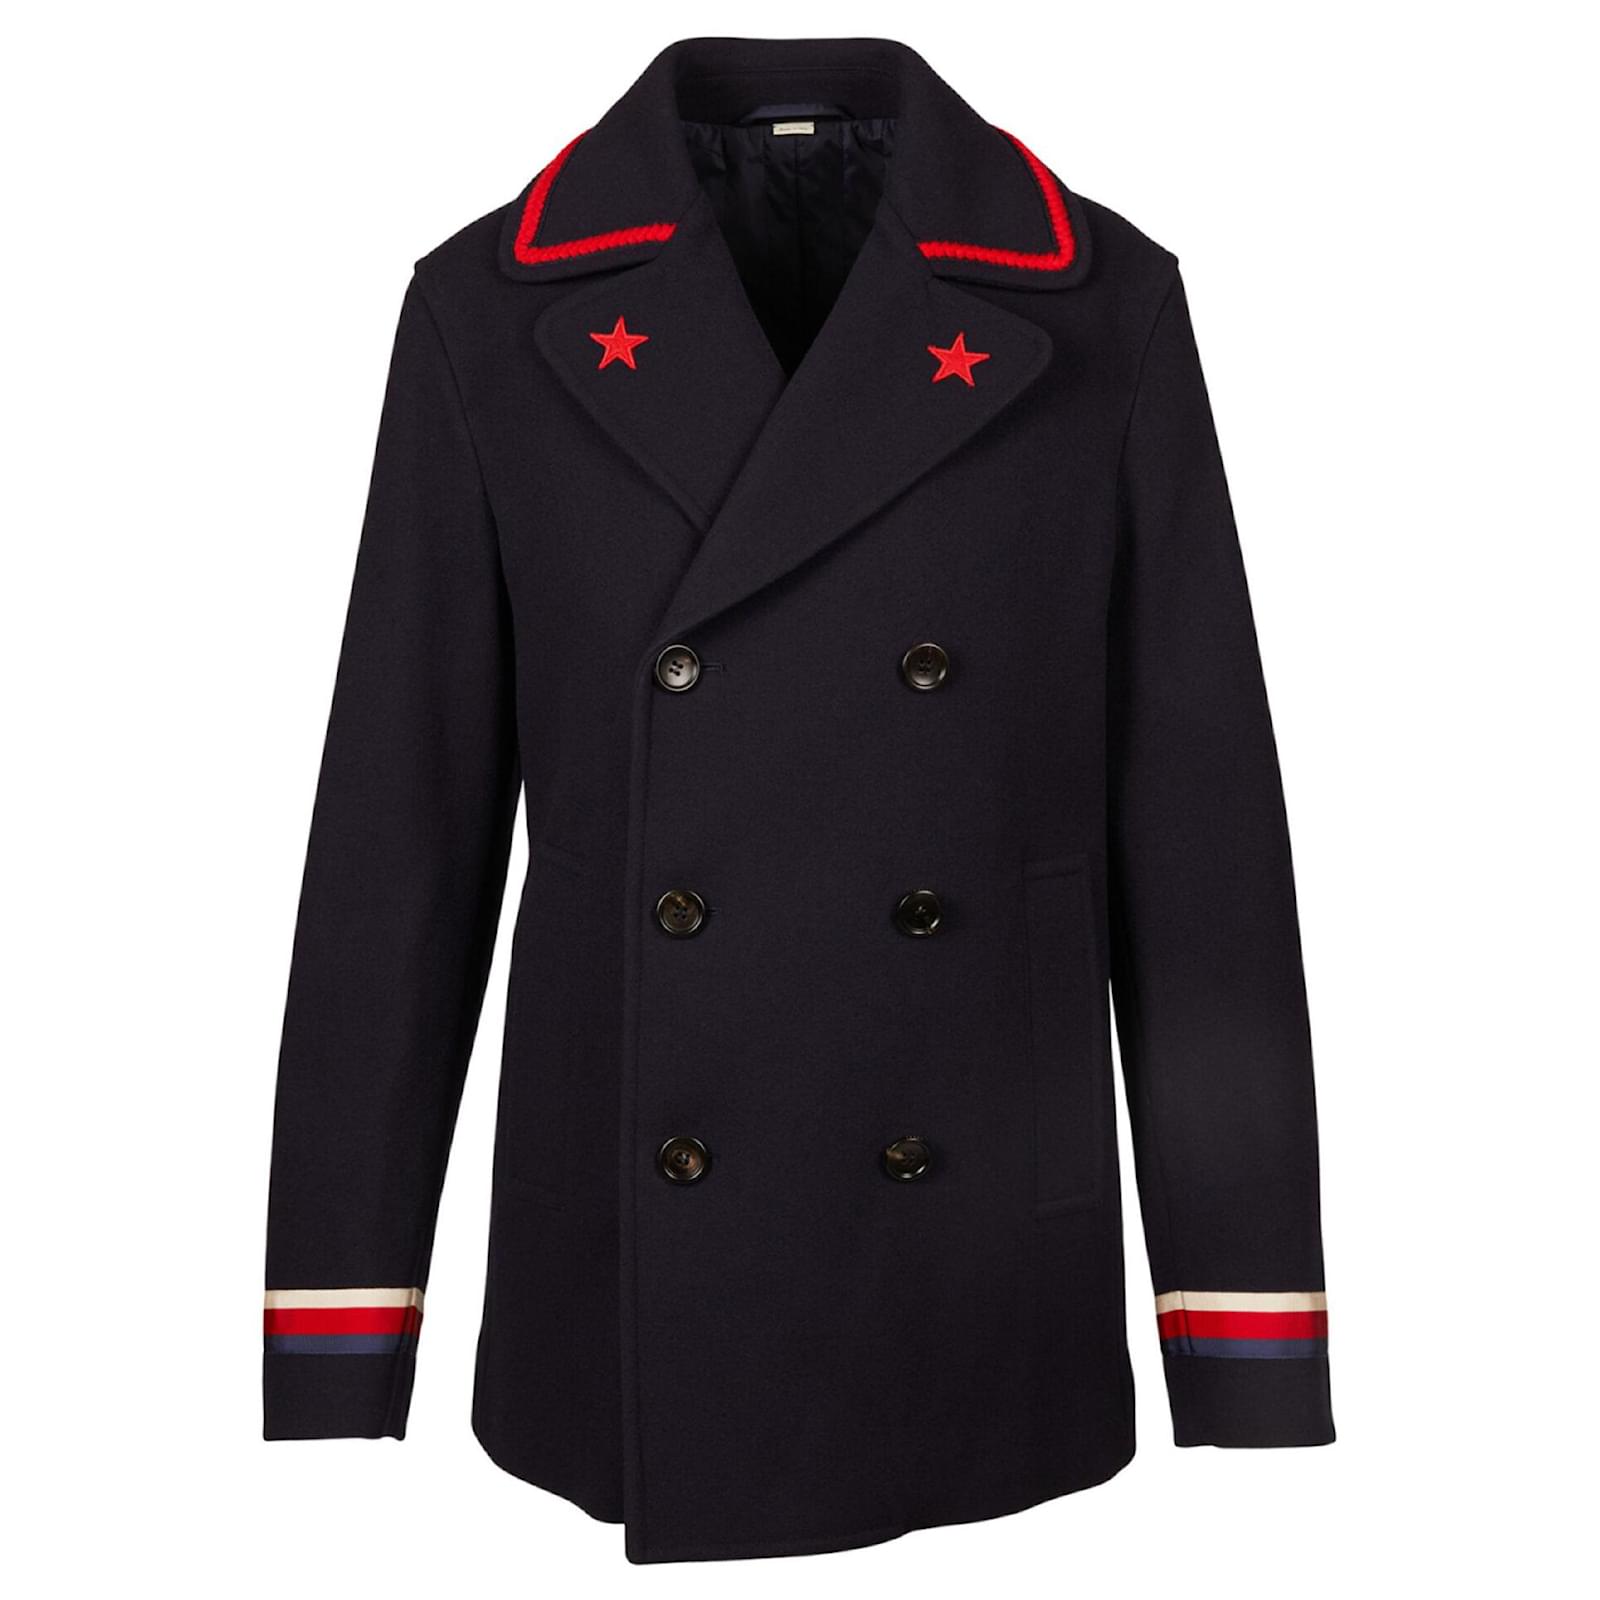 Gucci double-breasted wool coat, Red